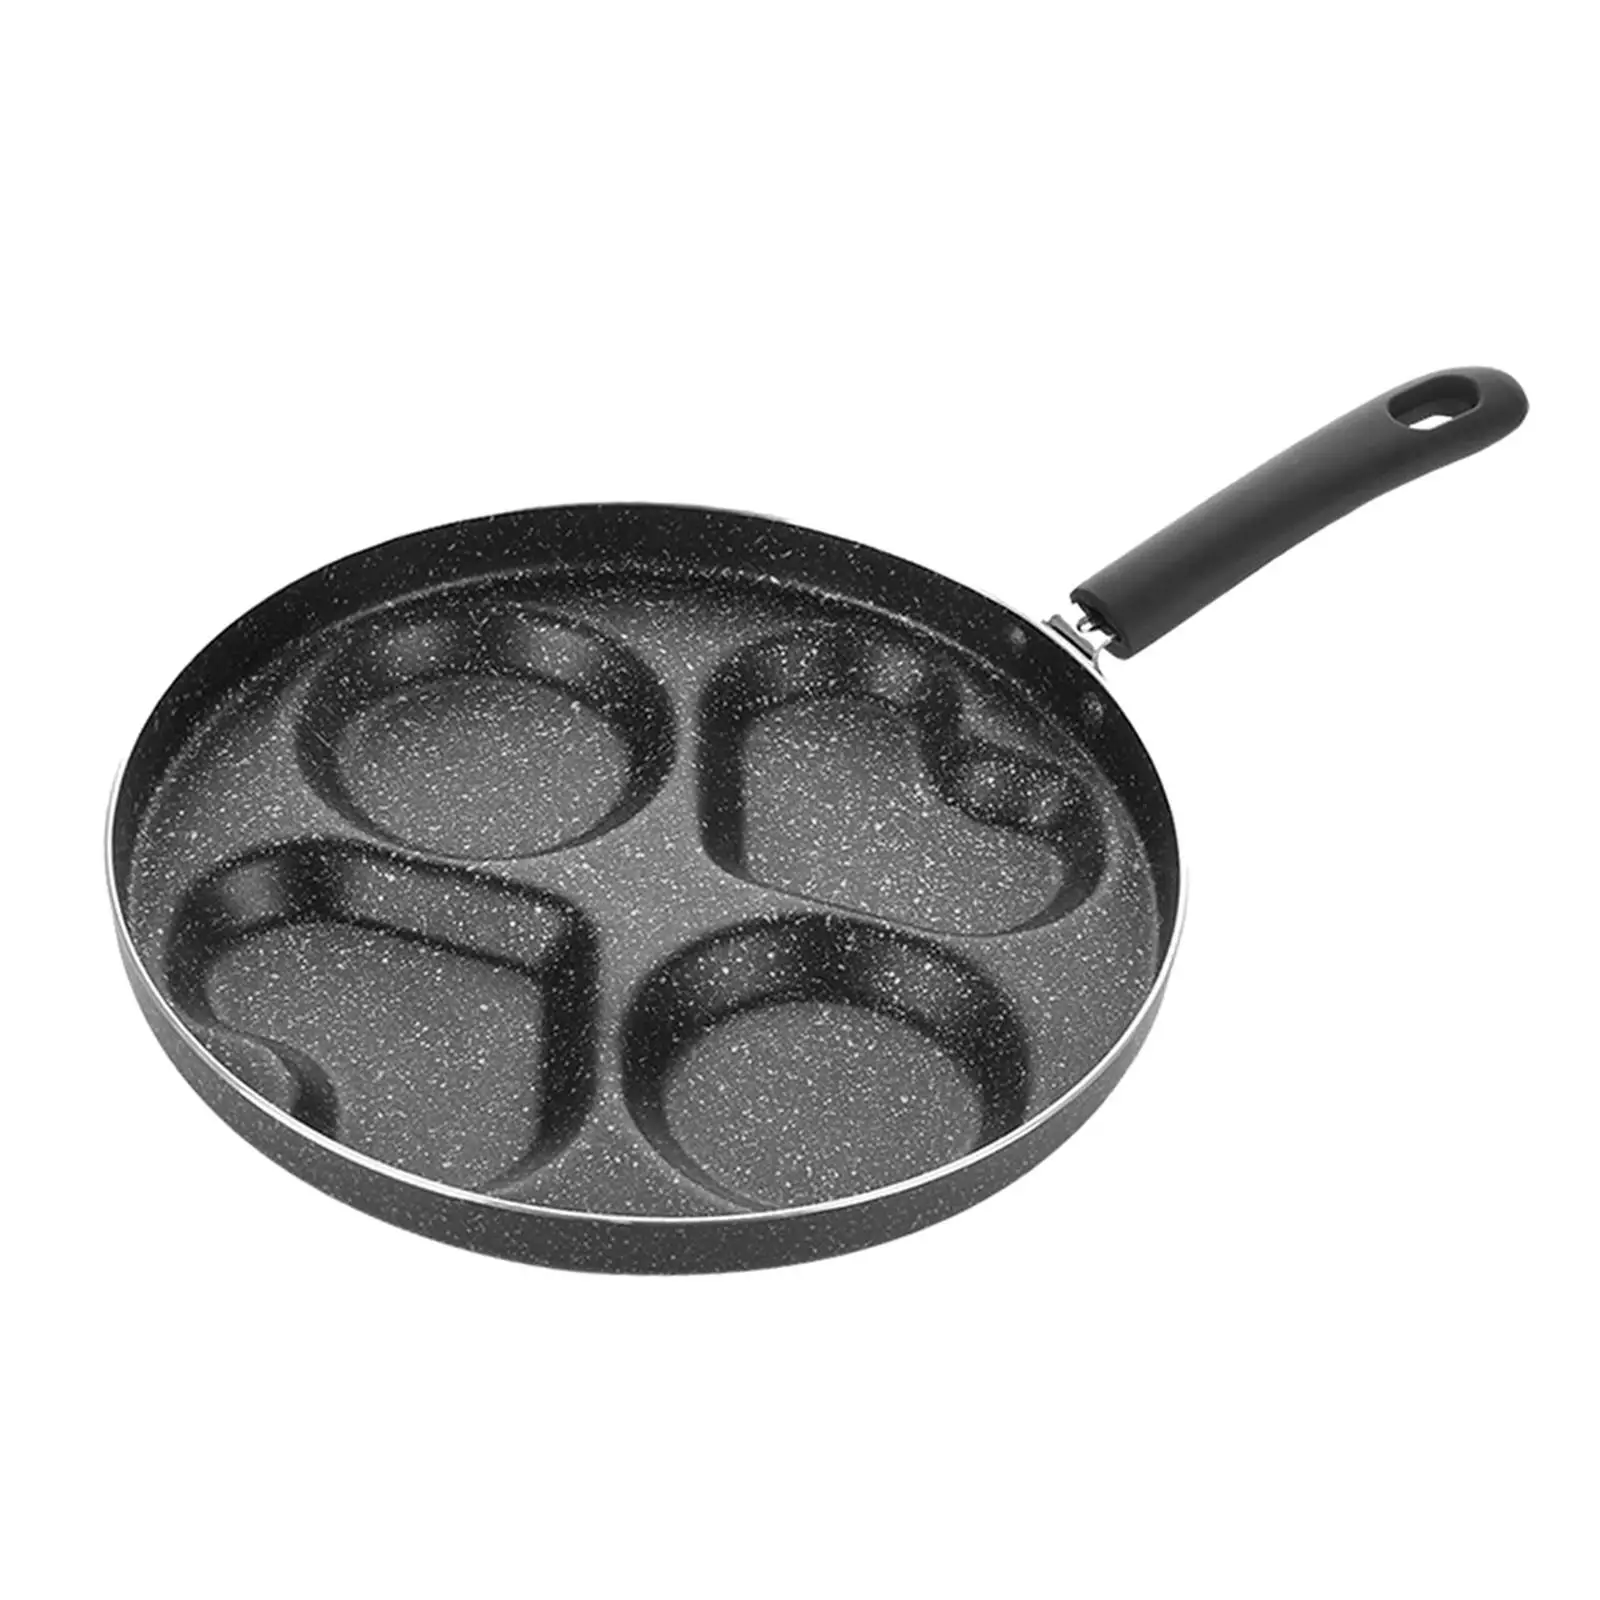 4 Cup Egg Frying Pan Cookware Omelette Pan Divided Grill Pan Burgers Eggs Pancake Maker for Restaurants Household Kitchen Hotel